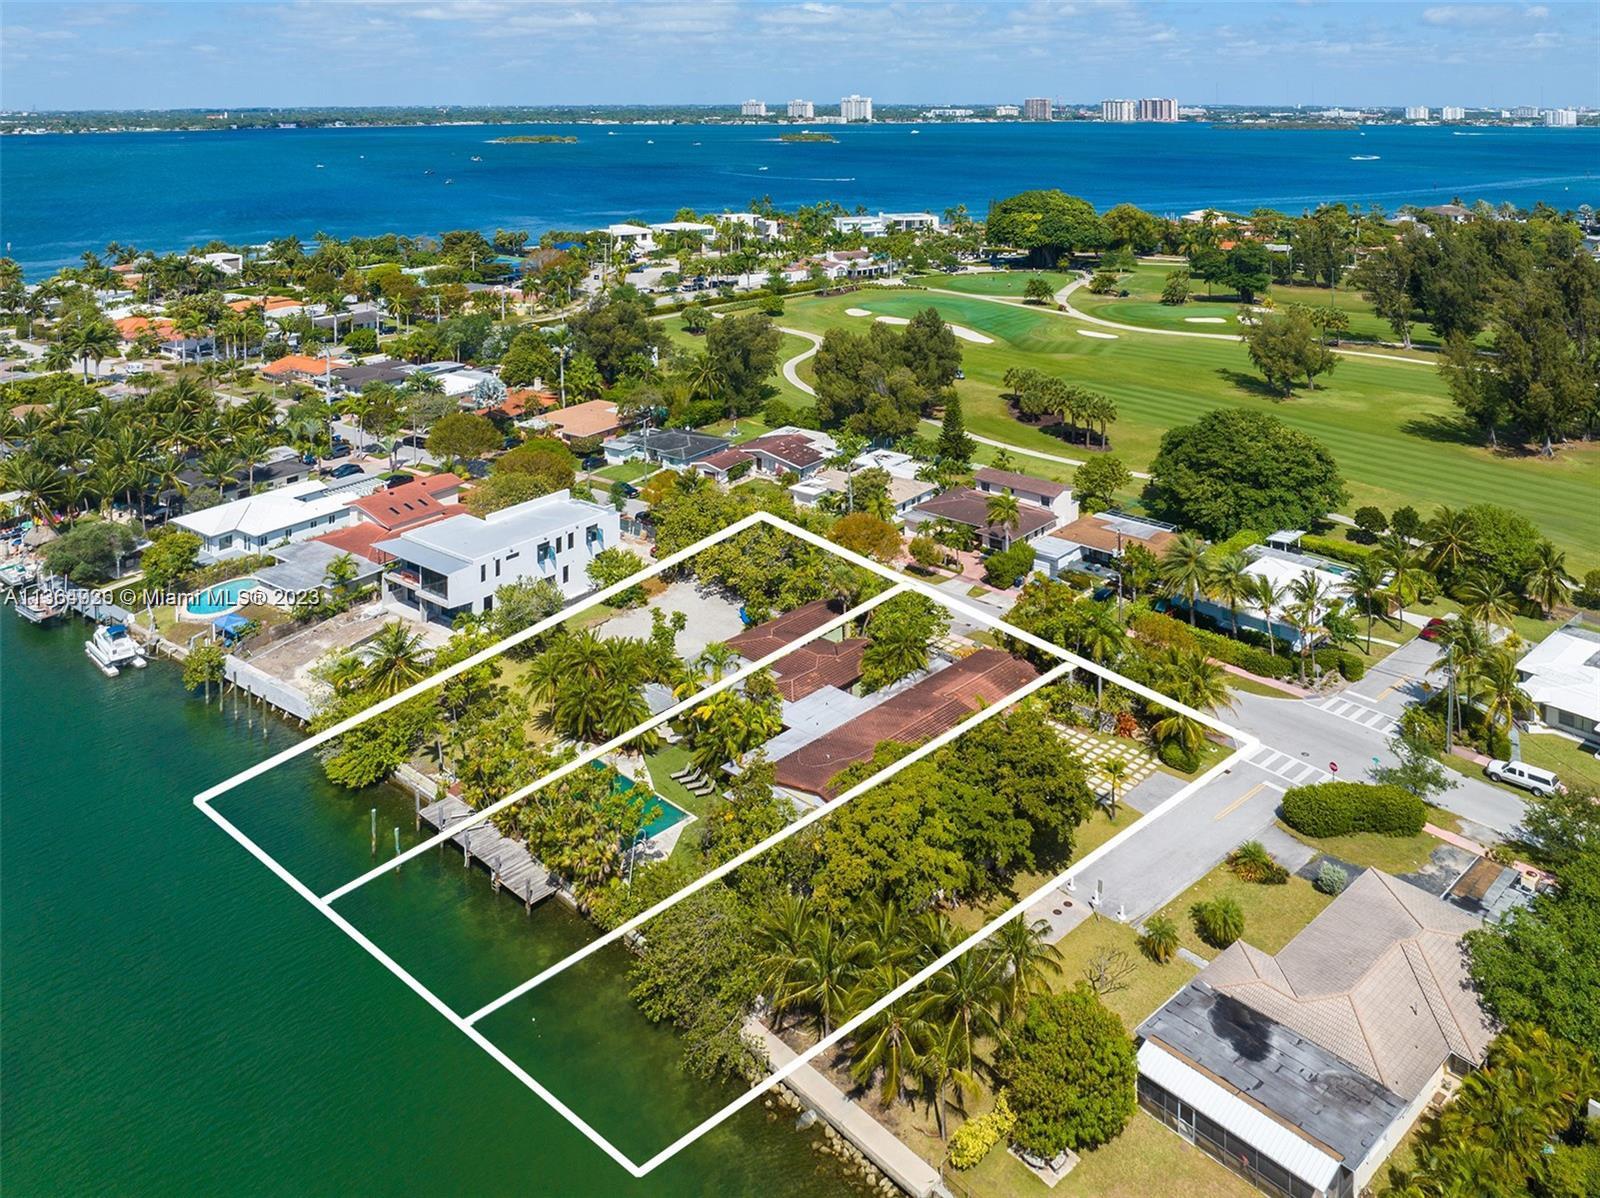 BACK ON THE MARKET! REPRICED TO SELL! DEVELOPERS WELCOME! This incredible waterfront property sits on a rare-find oversize 33,368 SQFT lot w/ 170FT of water frontage in the exclusive golf-gated community of Normandy Shores. Just 15’ from Bal Harbour, South Beach & Wynwood, one of the most desirable waterfront luxury living spots in Miami Beach offers golf, tennis courts, park and more. An amazing opportunity to build a state-of-the-art 16,000 SQFT Mansion, or subdivided land into 2 or 3 lots to build some incredible homes. Each 11,120 SFT lot could accommodate a 5,500 SQFT, 2 story residence, w/ 5bd/5ba, chef kitchen, family/media rooms, 2 car garage, private pool, secluded garden, summer kitchen & boat dock. LUXURY WATERFRONT LIVING AT ITS BEST.